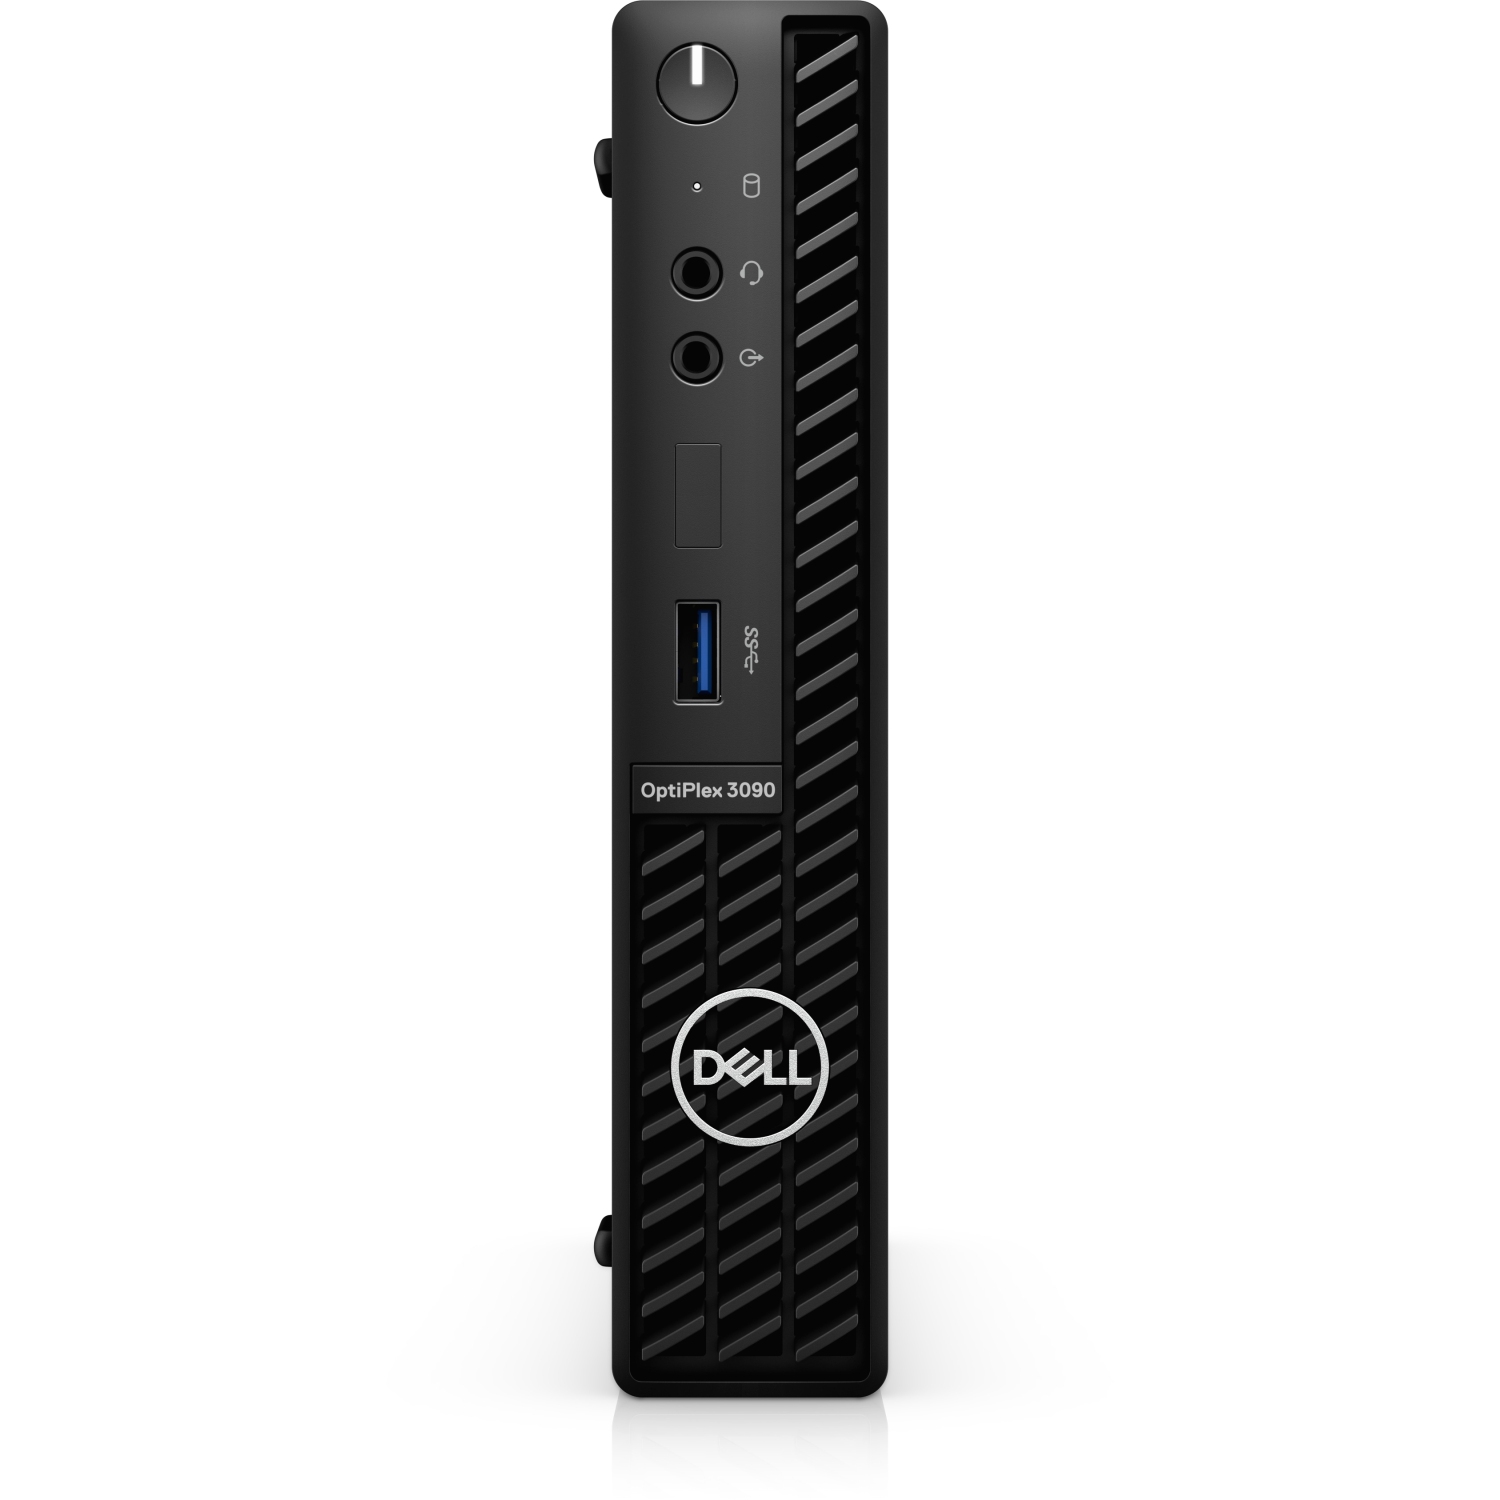 Refurbished (Excellent) – Dell Optiplex 3000 3090 Micro Tower Desktop (2021) | Core i5 - 1TB HDD + 512GB SSD - 32GB RAM | 6 Cores @ 3.8 GHz - 10th Gen CPU